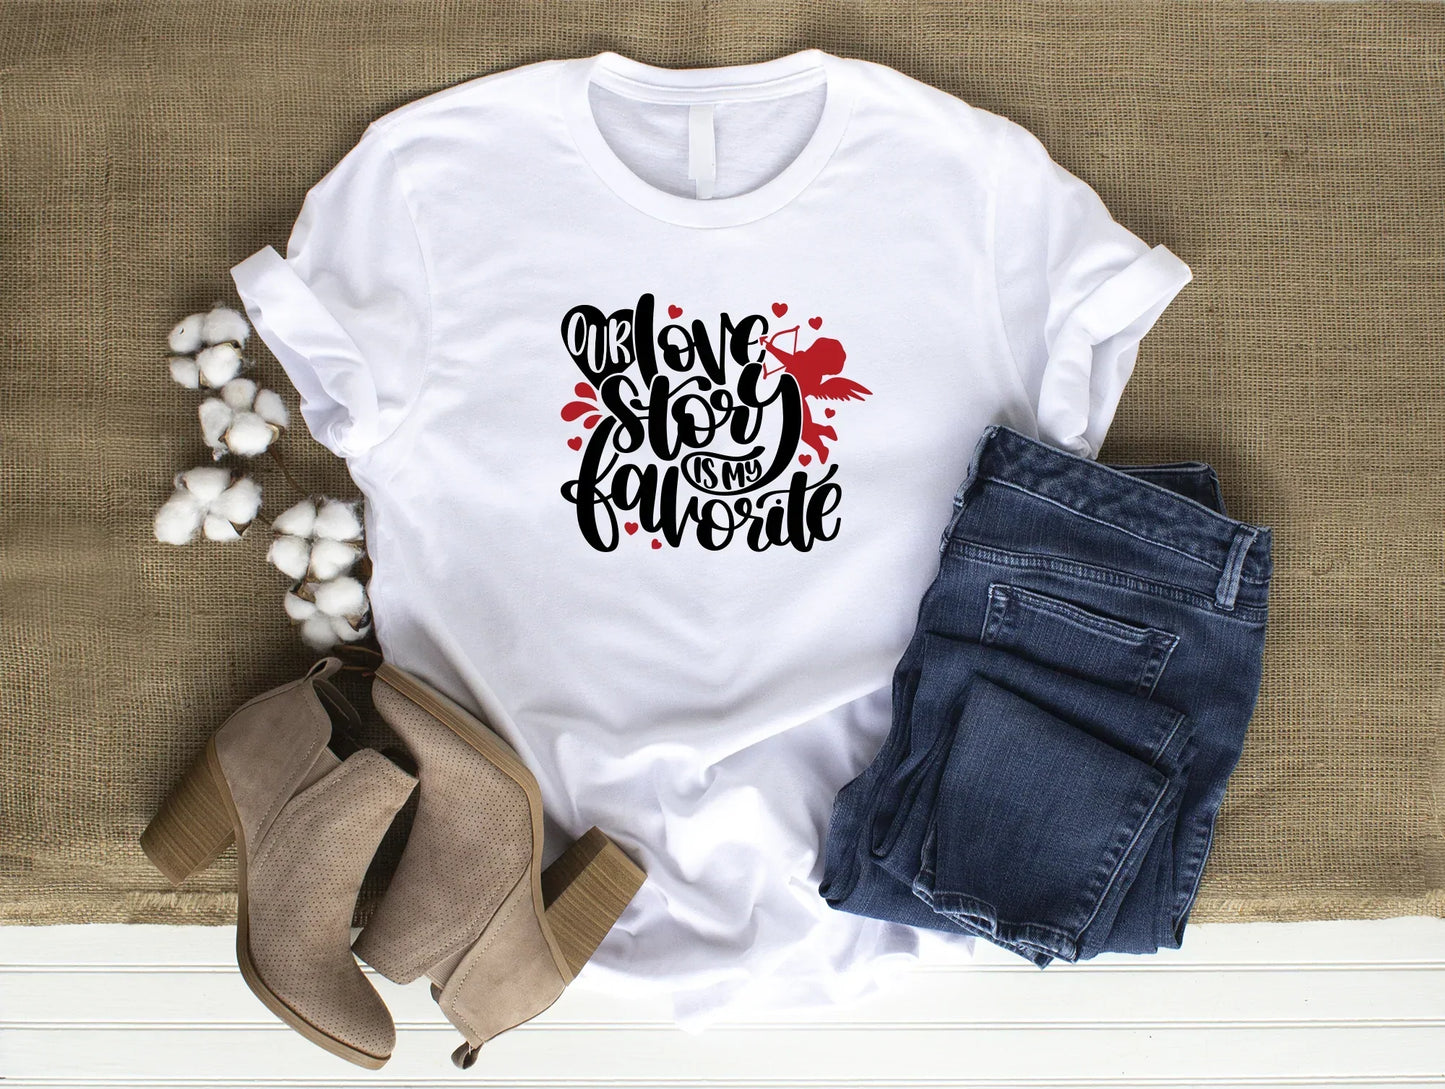 Our Love Story Is My Favorite Cute Comfy Valentine's Day White T-Shirt XL